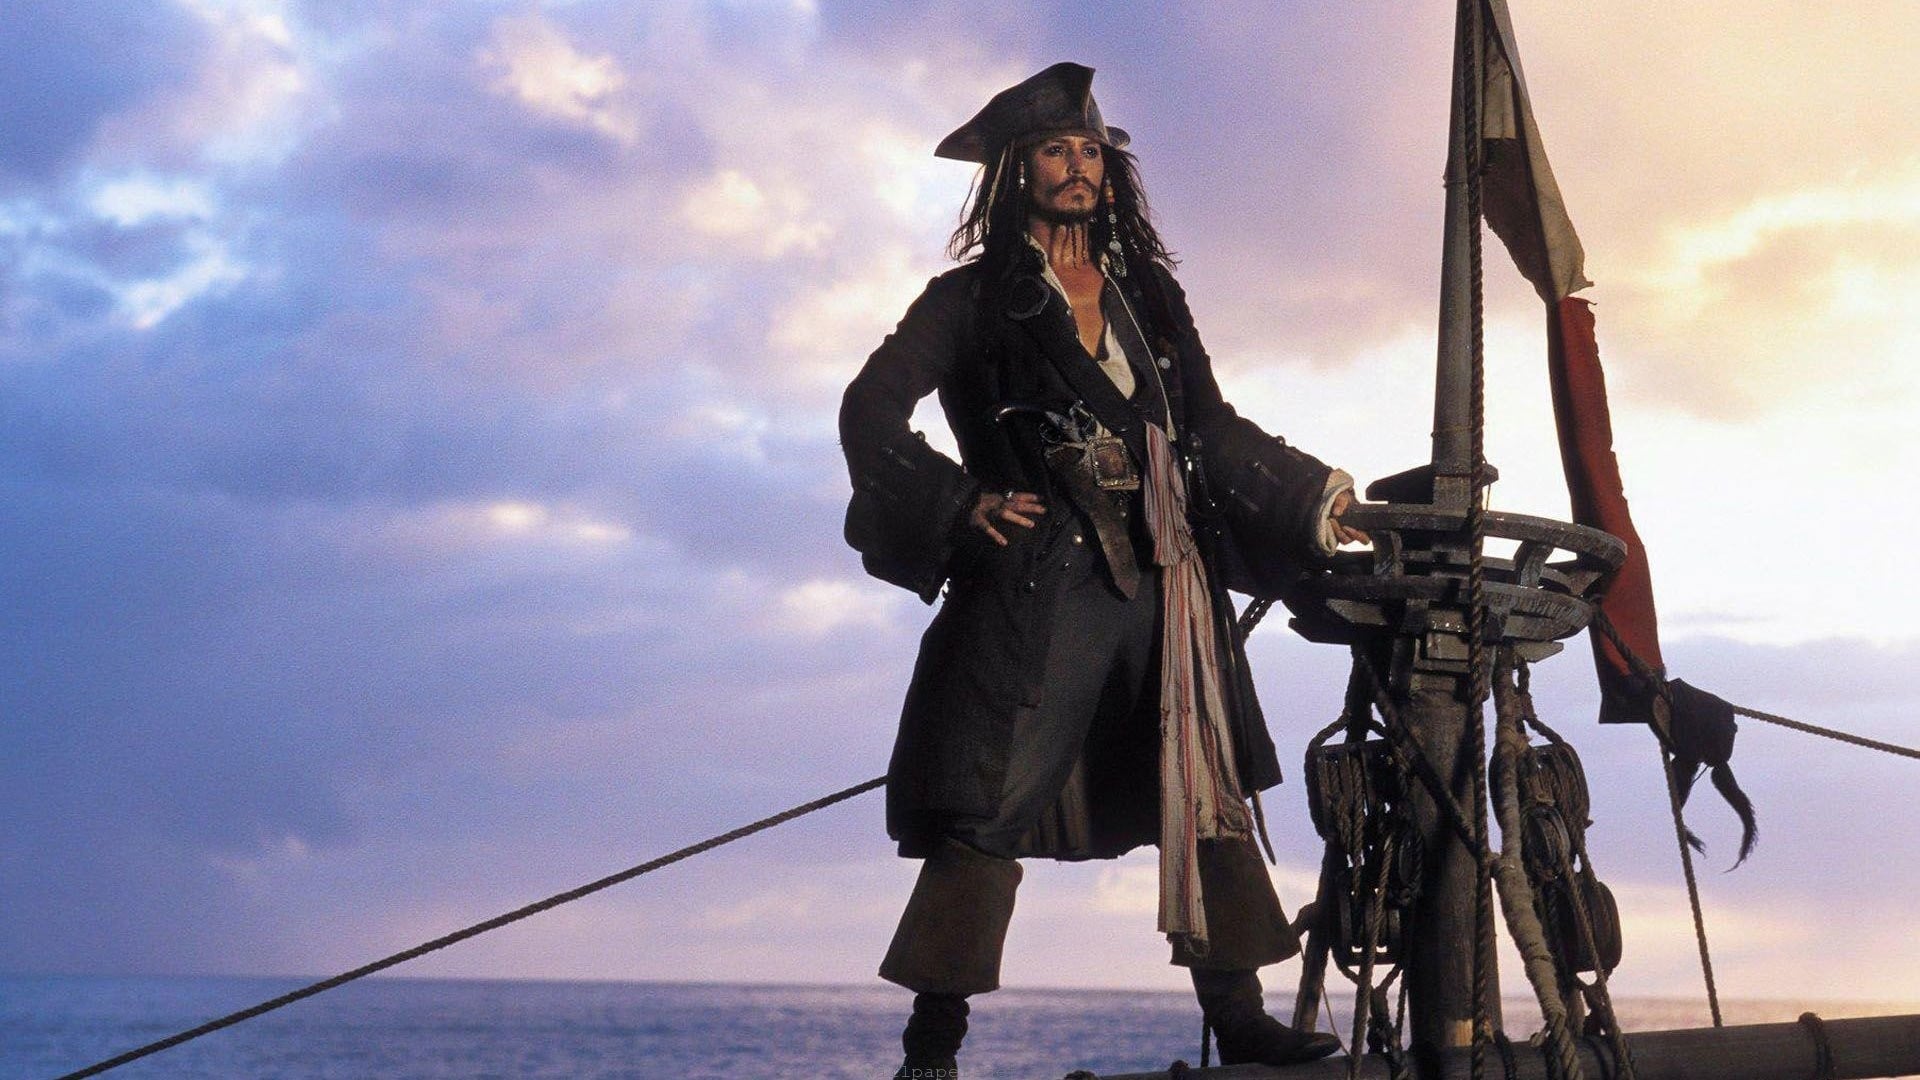 Pirates of the Caribbean: The Curse of the Black Pearl backdrop